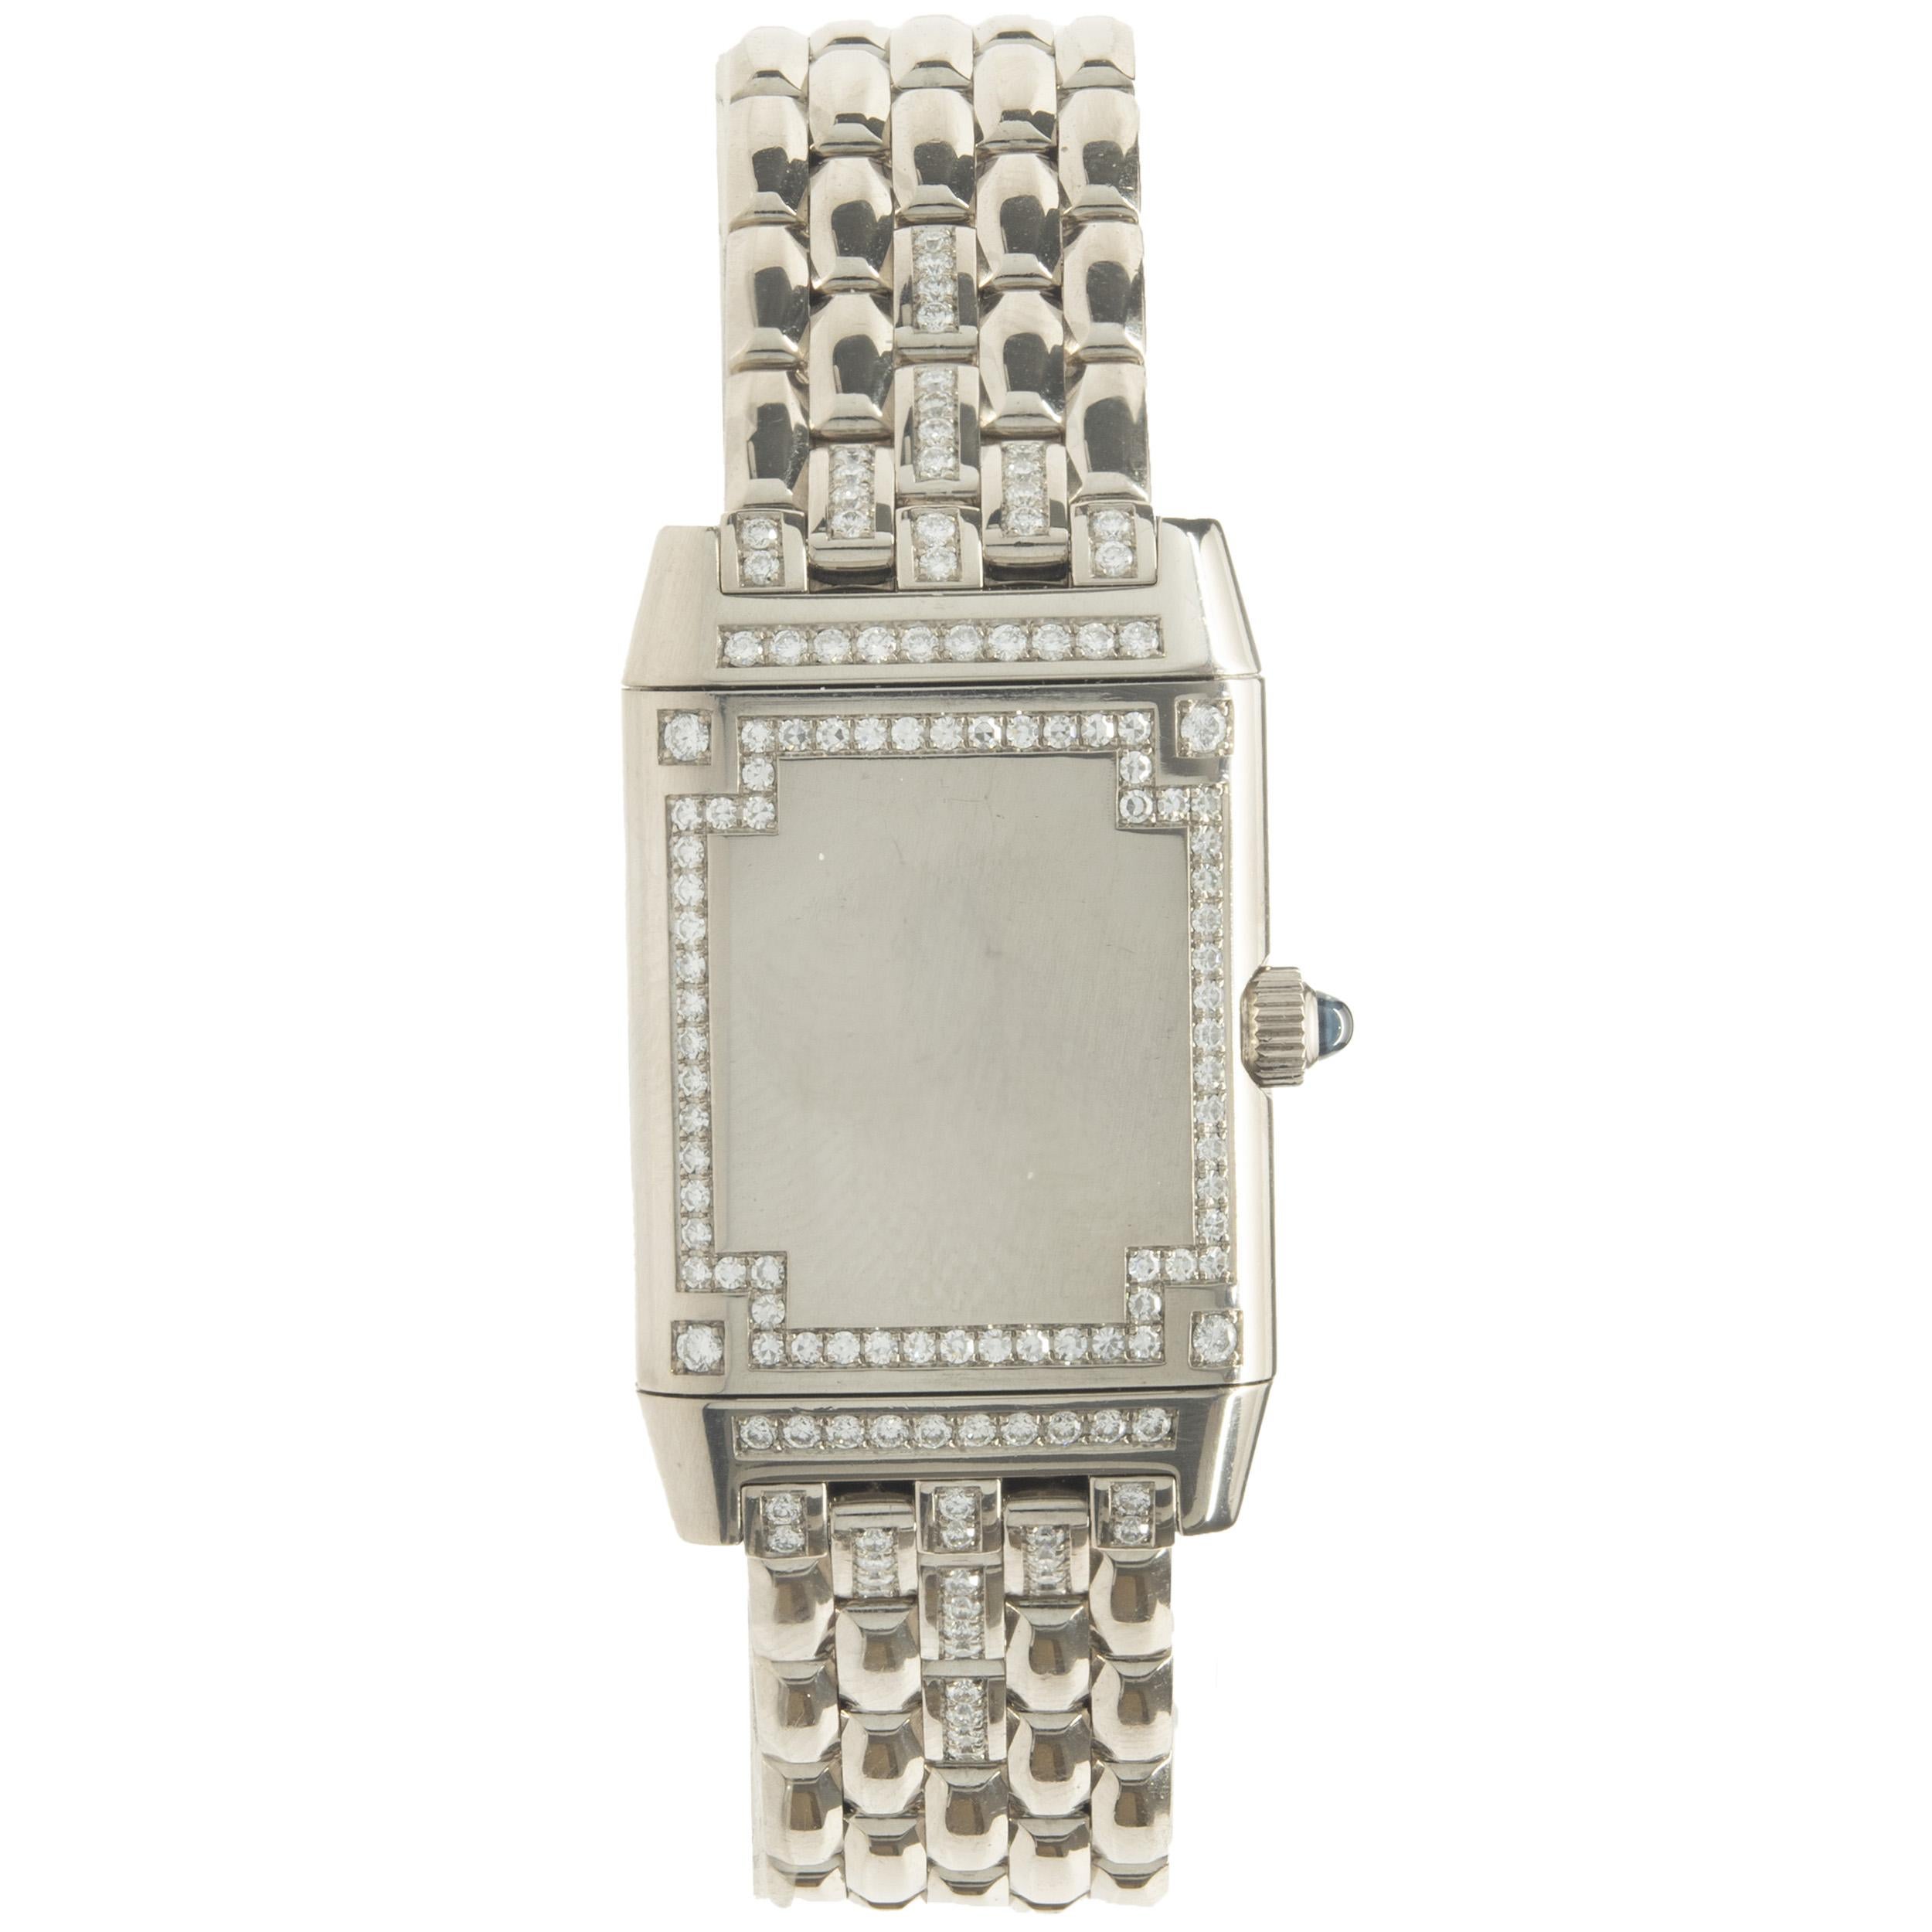 Movement: manual
Function: hours, minutes
Case: 20mm 18K white gold rectangular case, diamond bezel
Dial: white arabic/diamond dial
Band: 18K white gold link bracelet, integrated clasp
Reference #: 267.3.86
Serial #: 1982XXX
  
Complete with